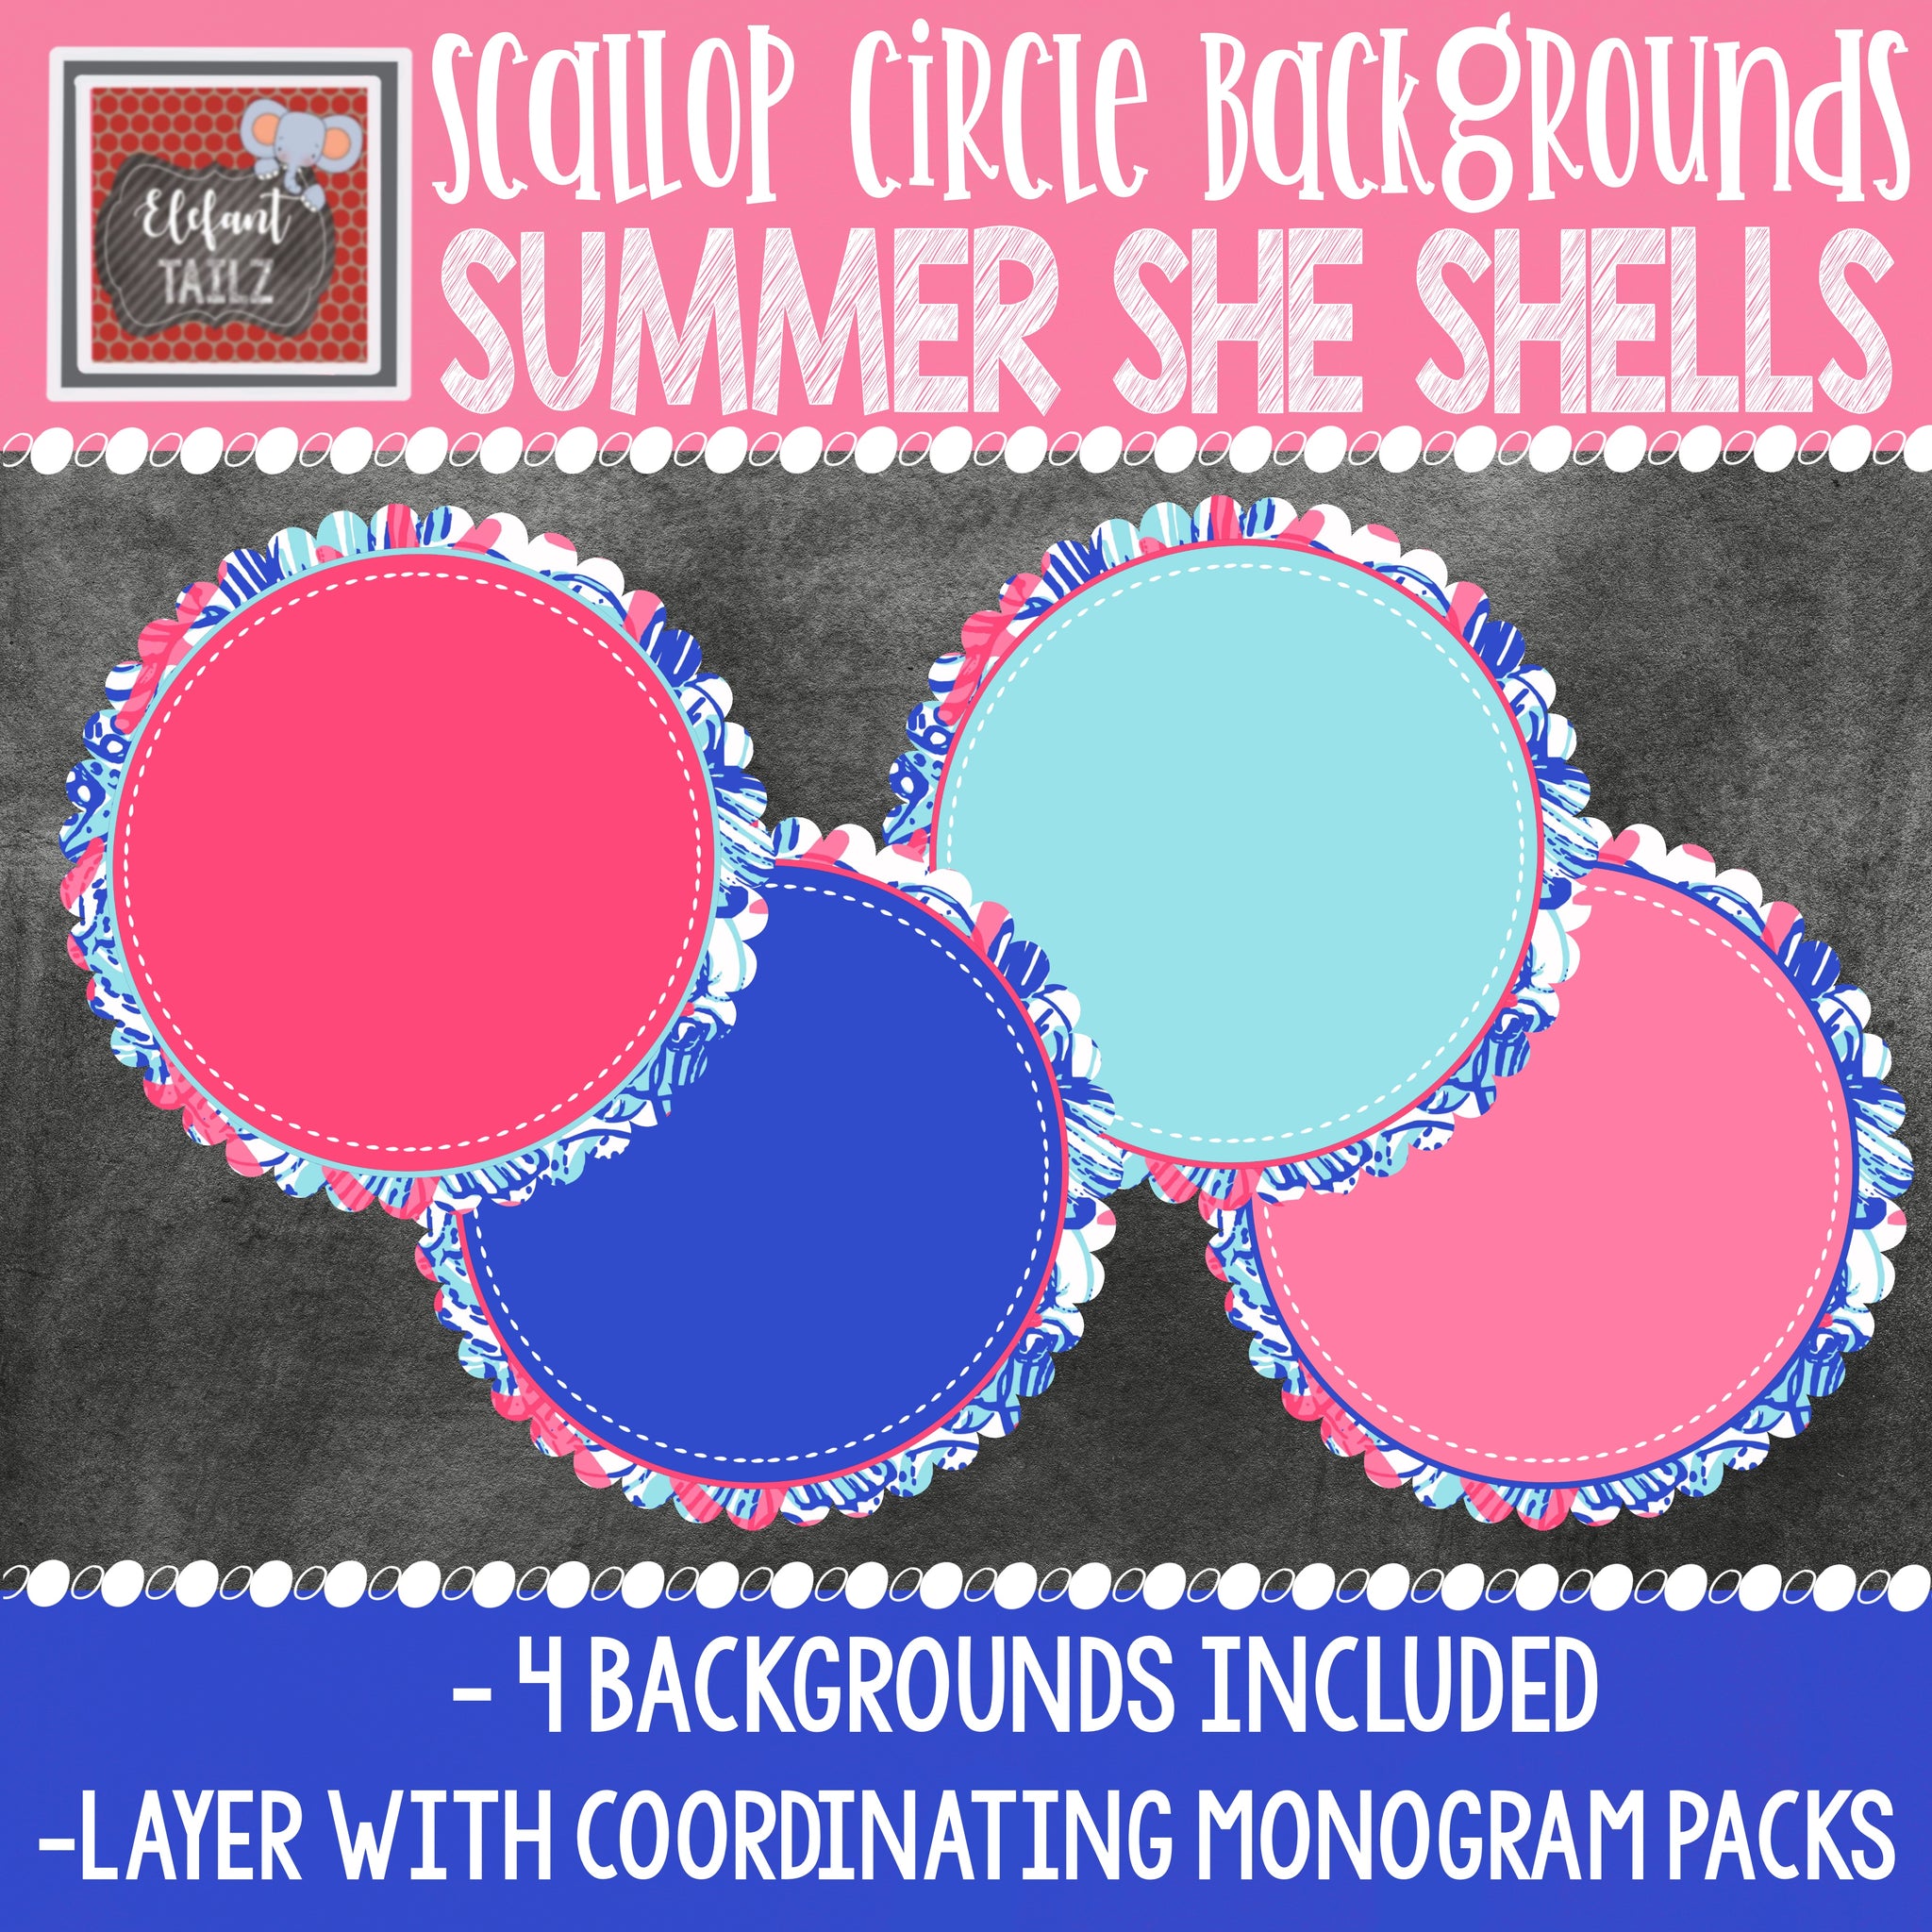 Lilly Pulitzer Summer She Shells Scallop Circle Backgrounds